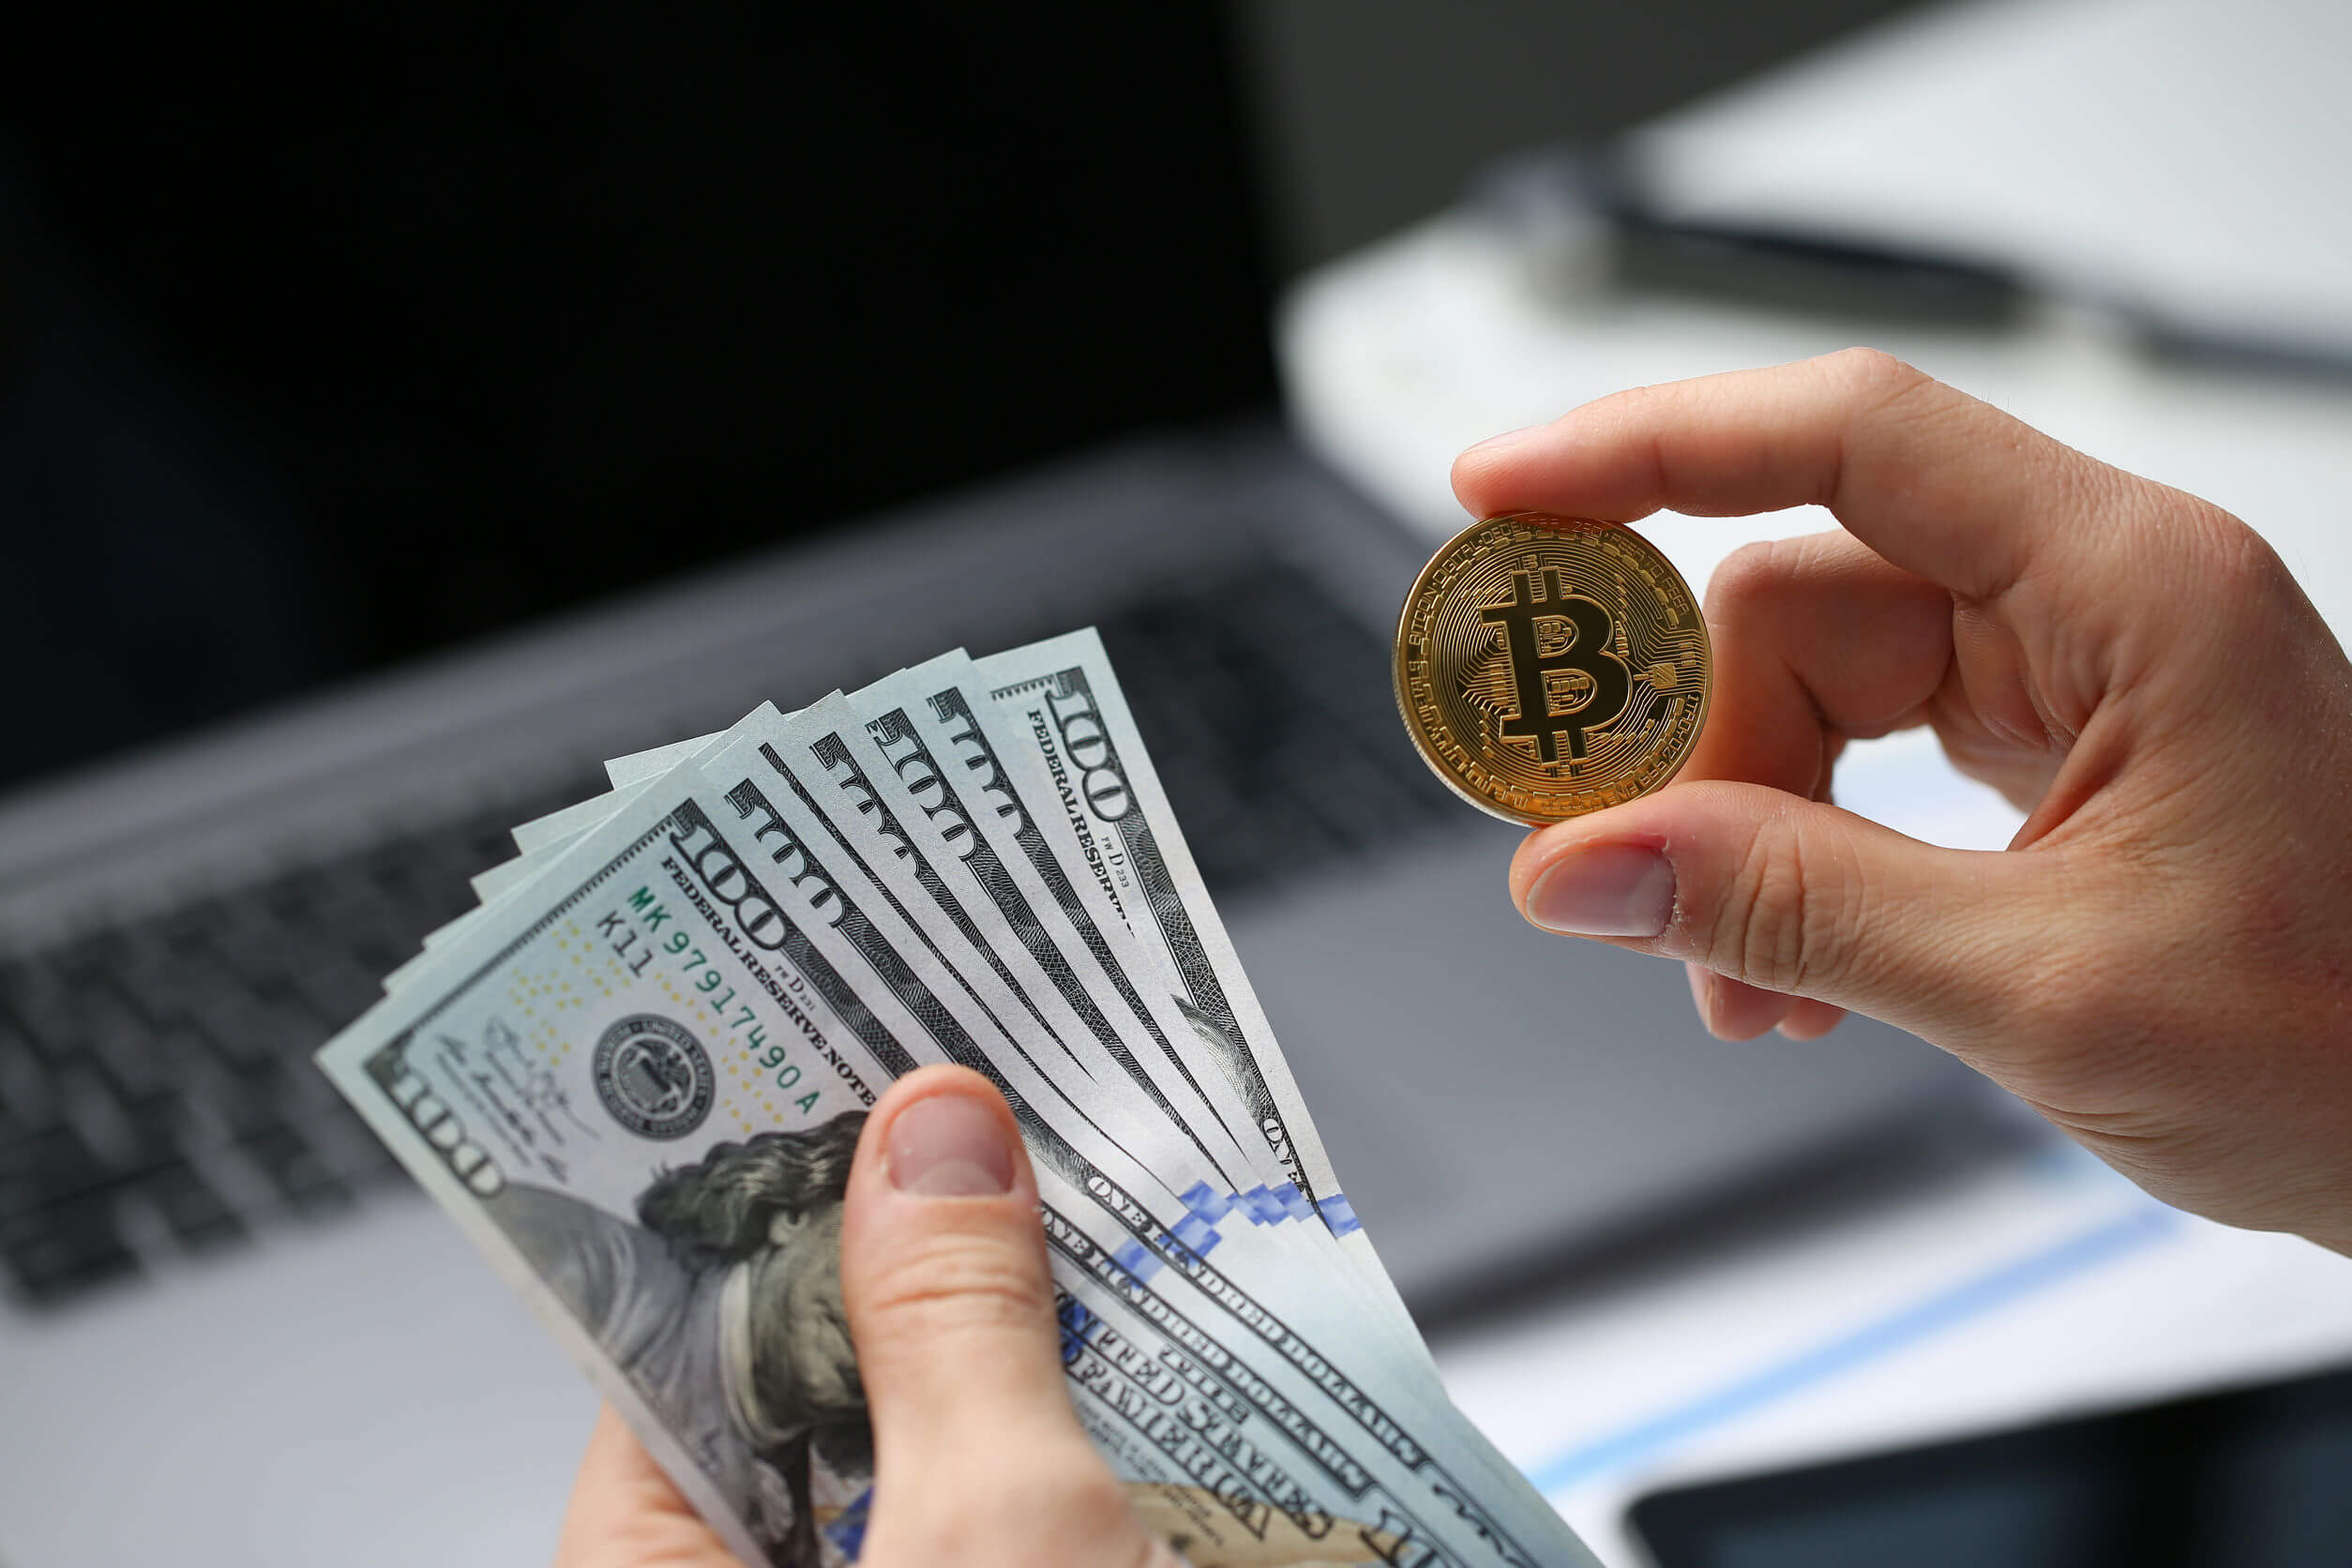 About bitcoin business can f1 students invest in cryptocurrency